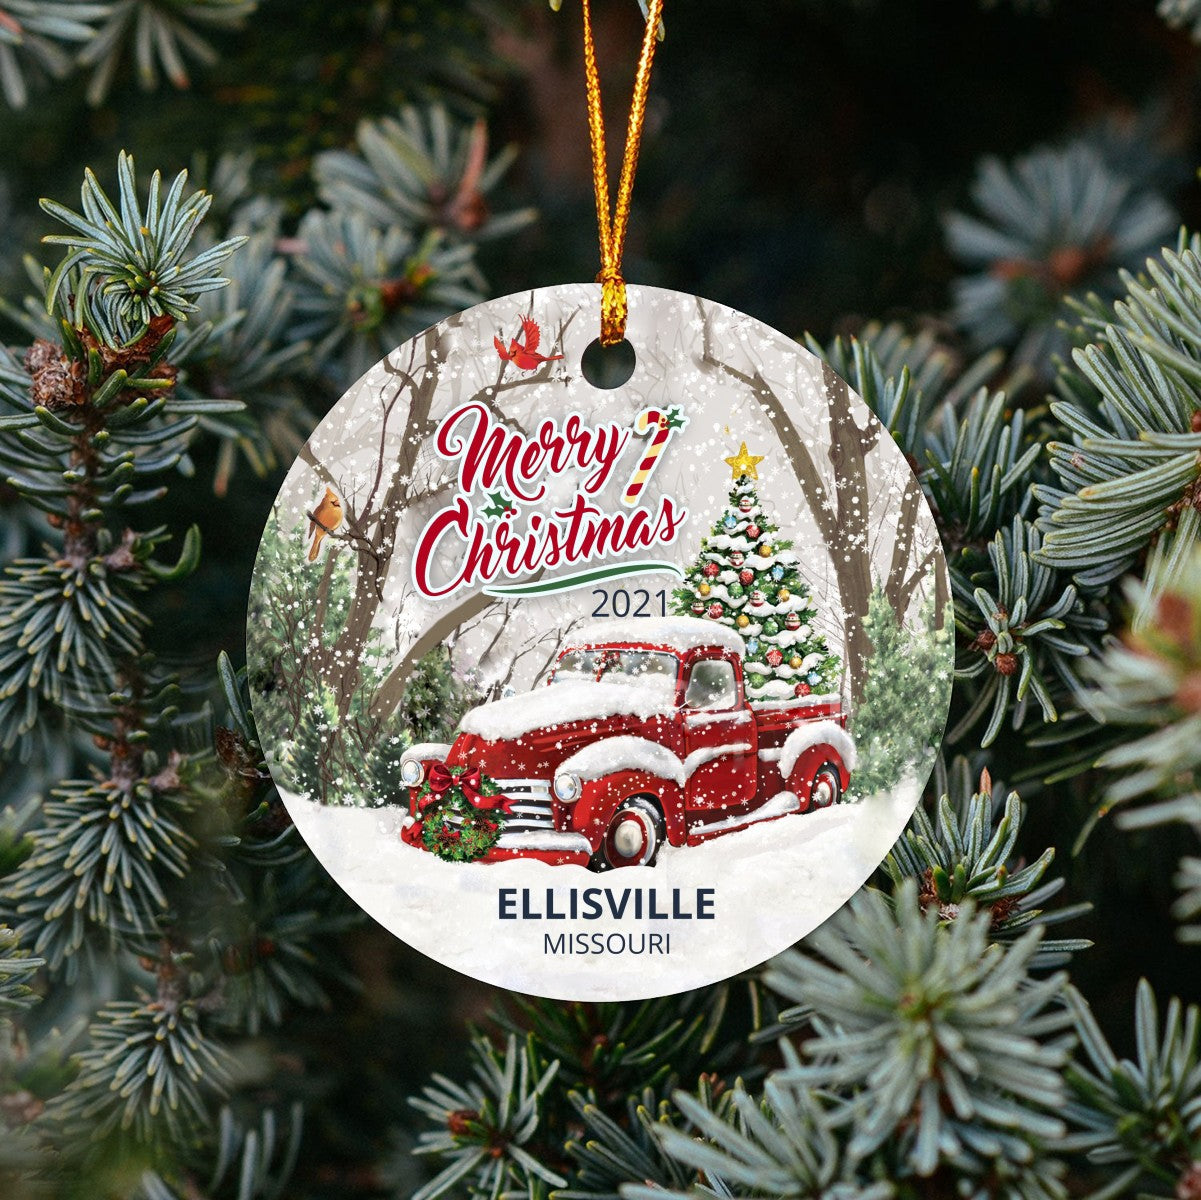 Christmas Tree Ornaments Ellisville - Ornament With Name City, State Ellisville Missouri MO Ornament - Red Truck Xmas Ornaments 3'' Plastic Gift For Family, Friend And Housewarming